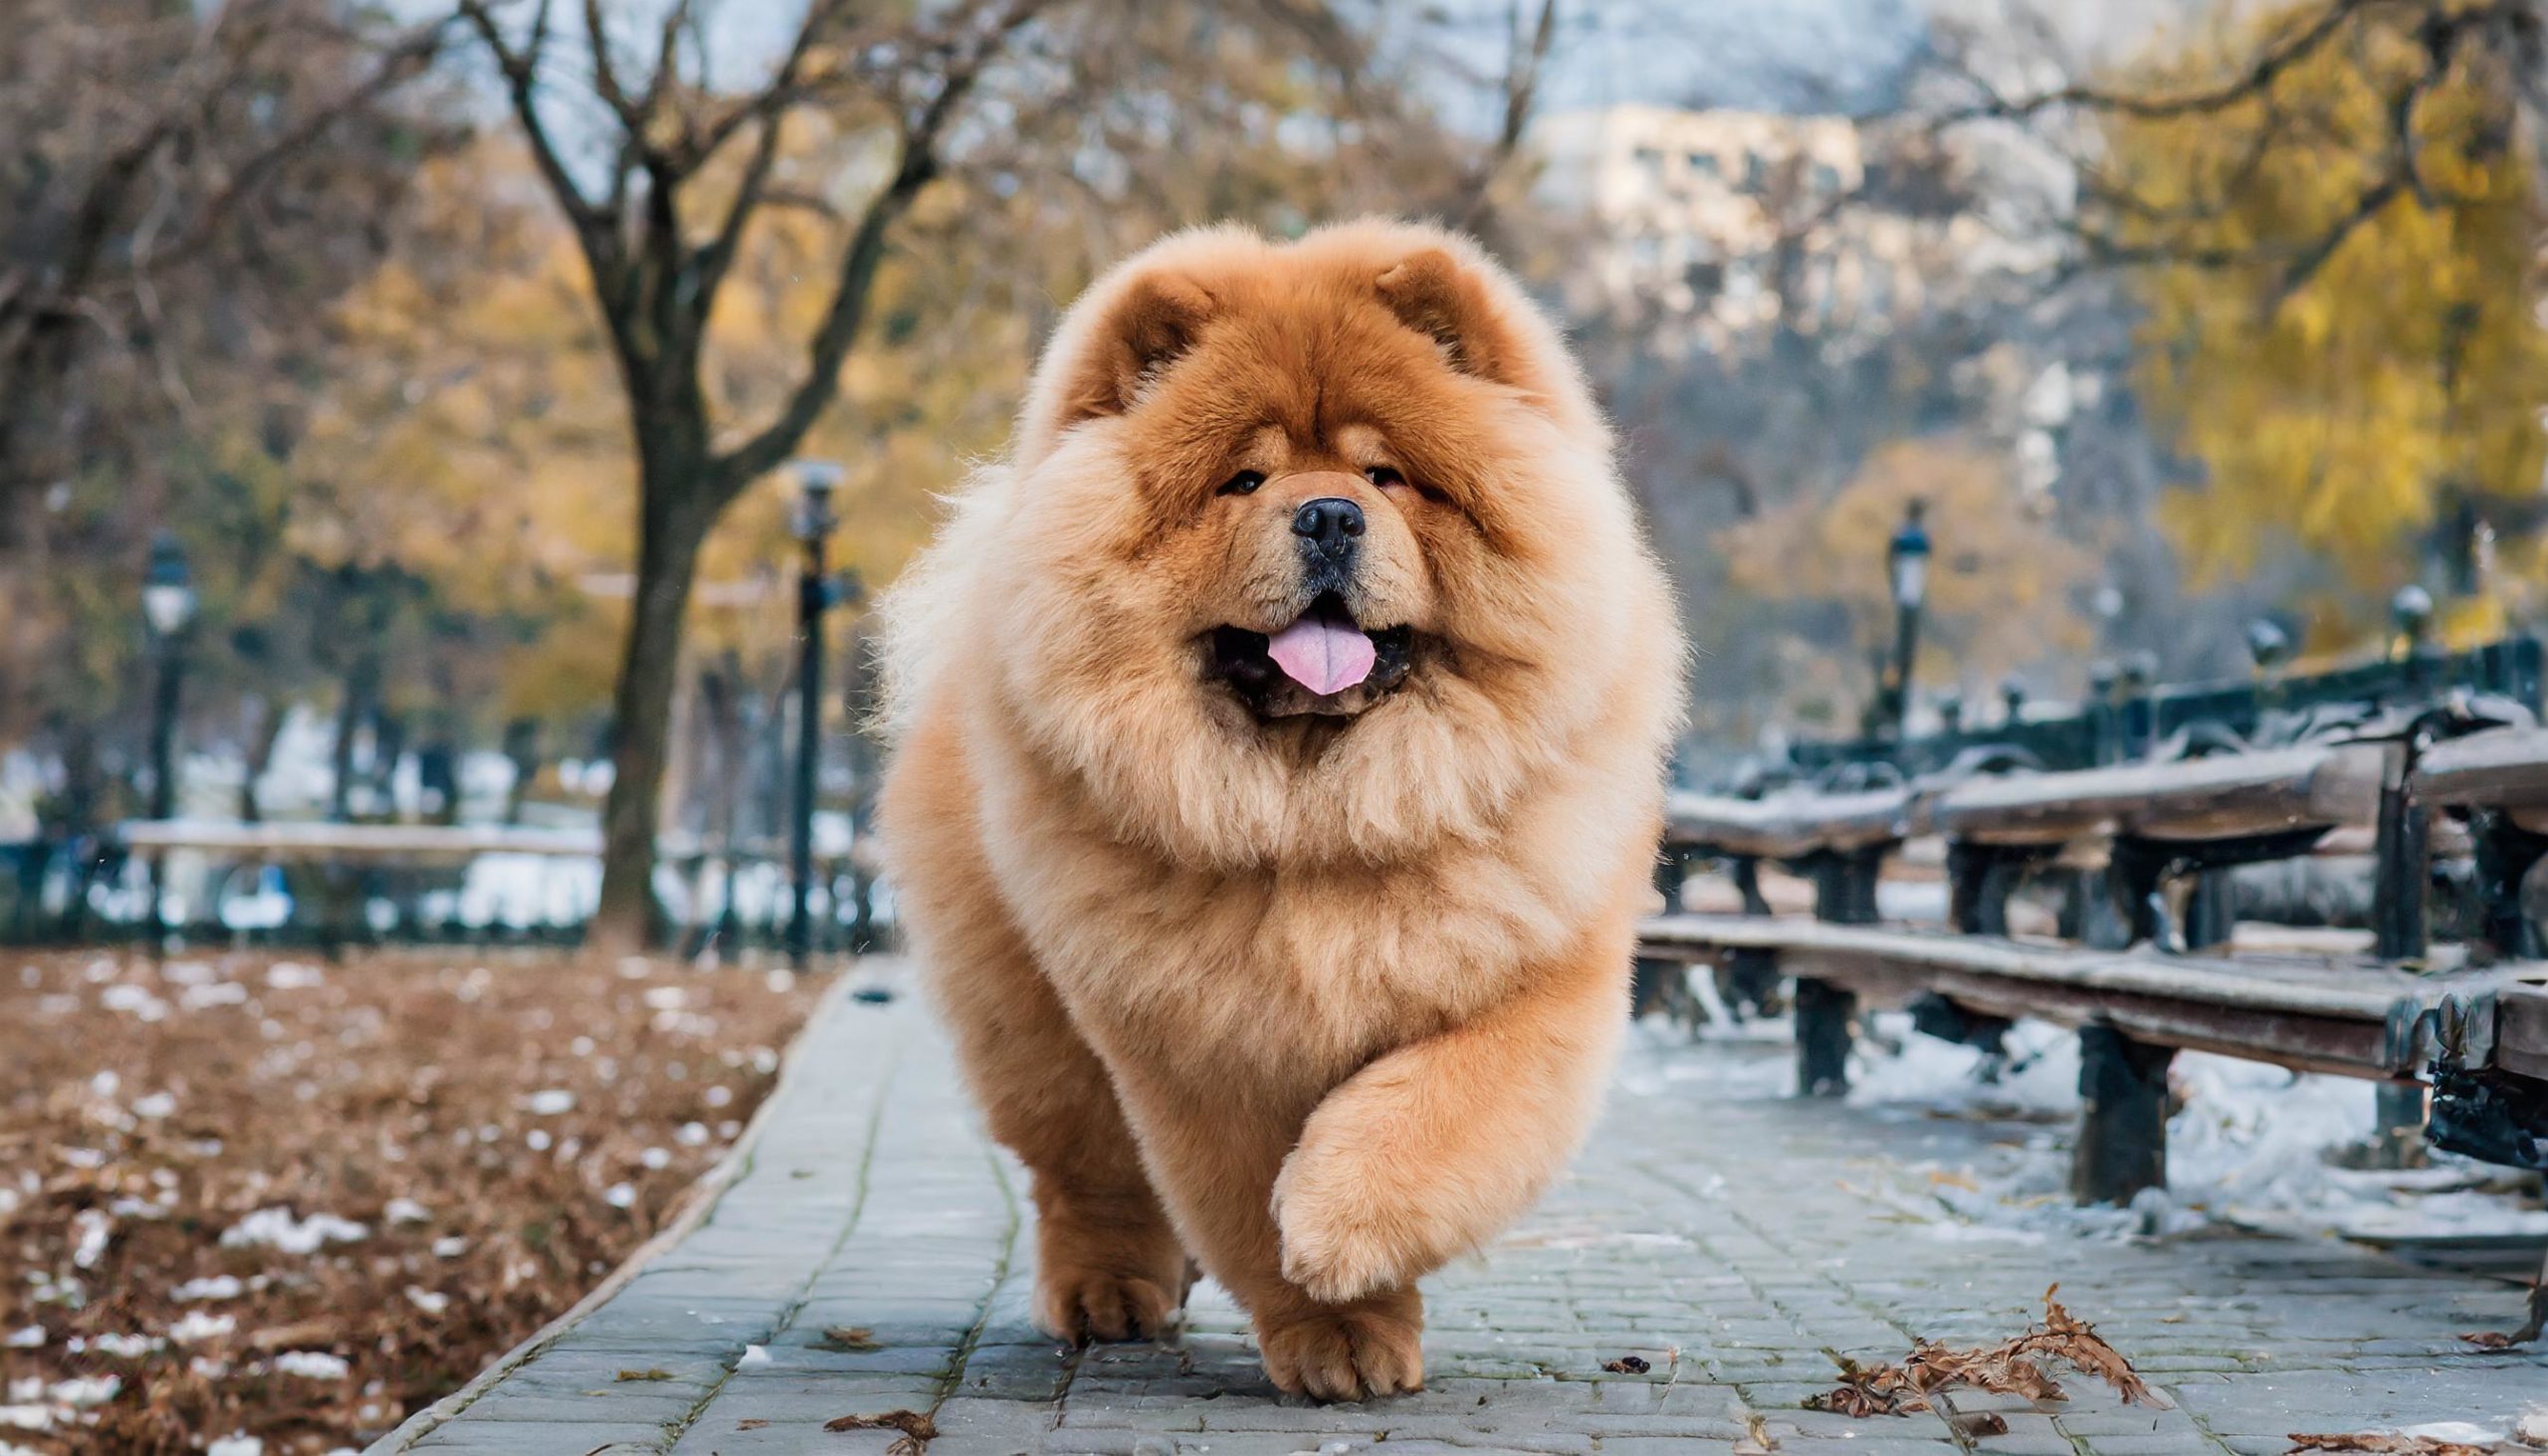 The Chow chow enjoying his daily walk through the park